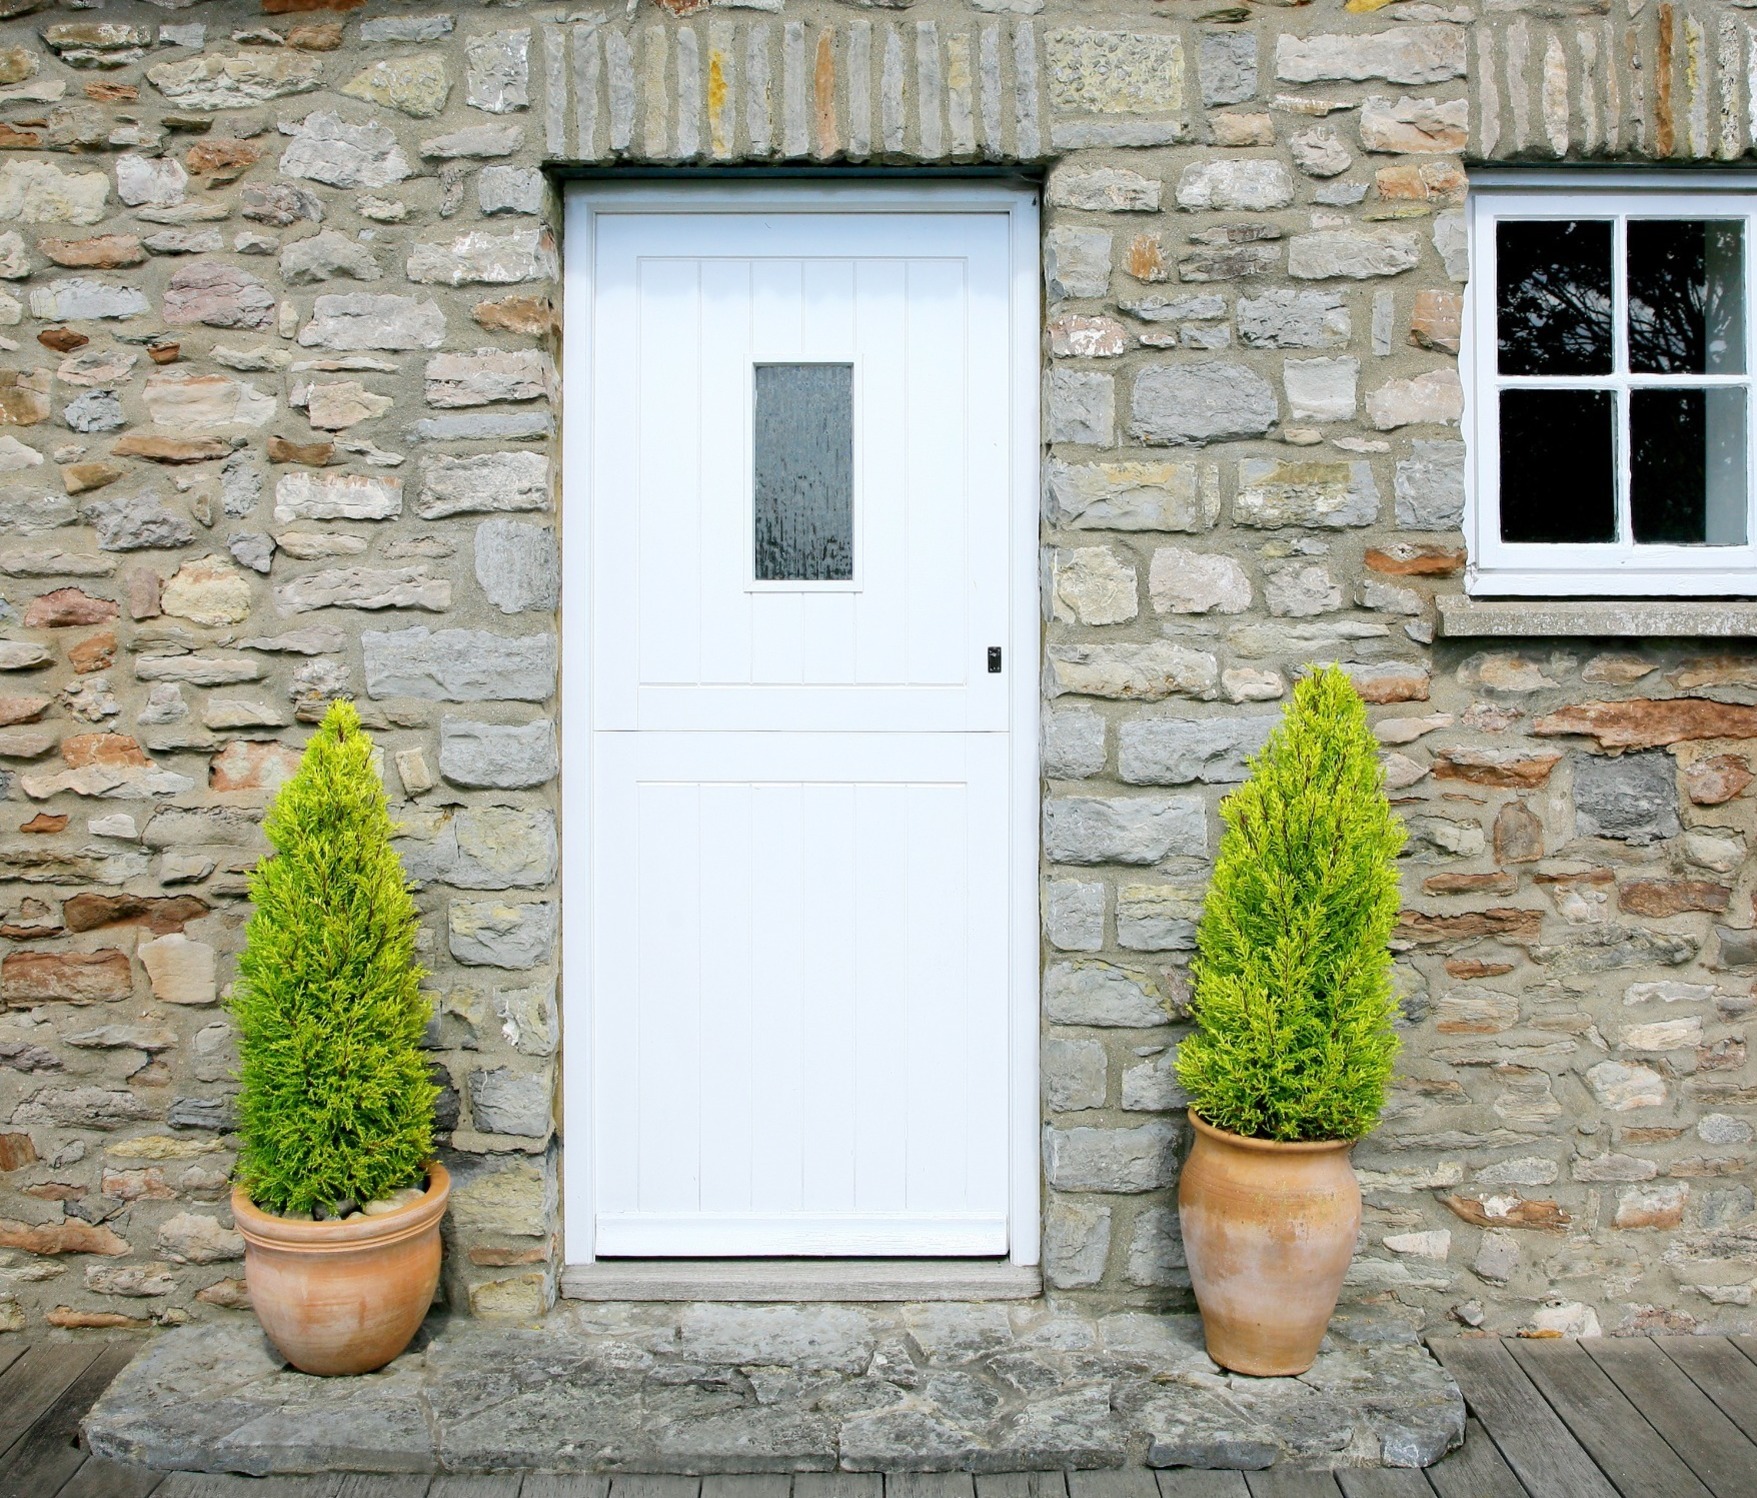 A stone-fronted house with a white door, with a plant either side.  Our Conveyancing Solicitors can assist with residential property purchases.  Follow this link to find out more.